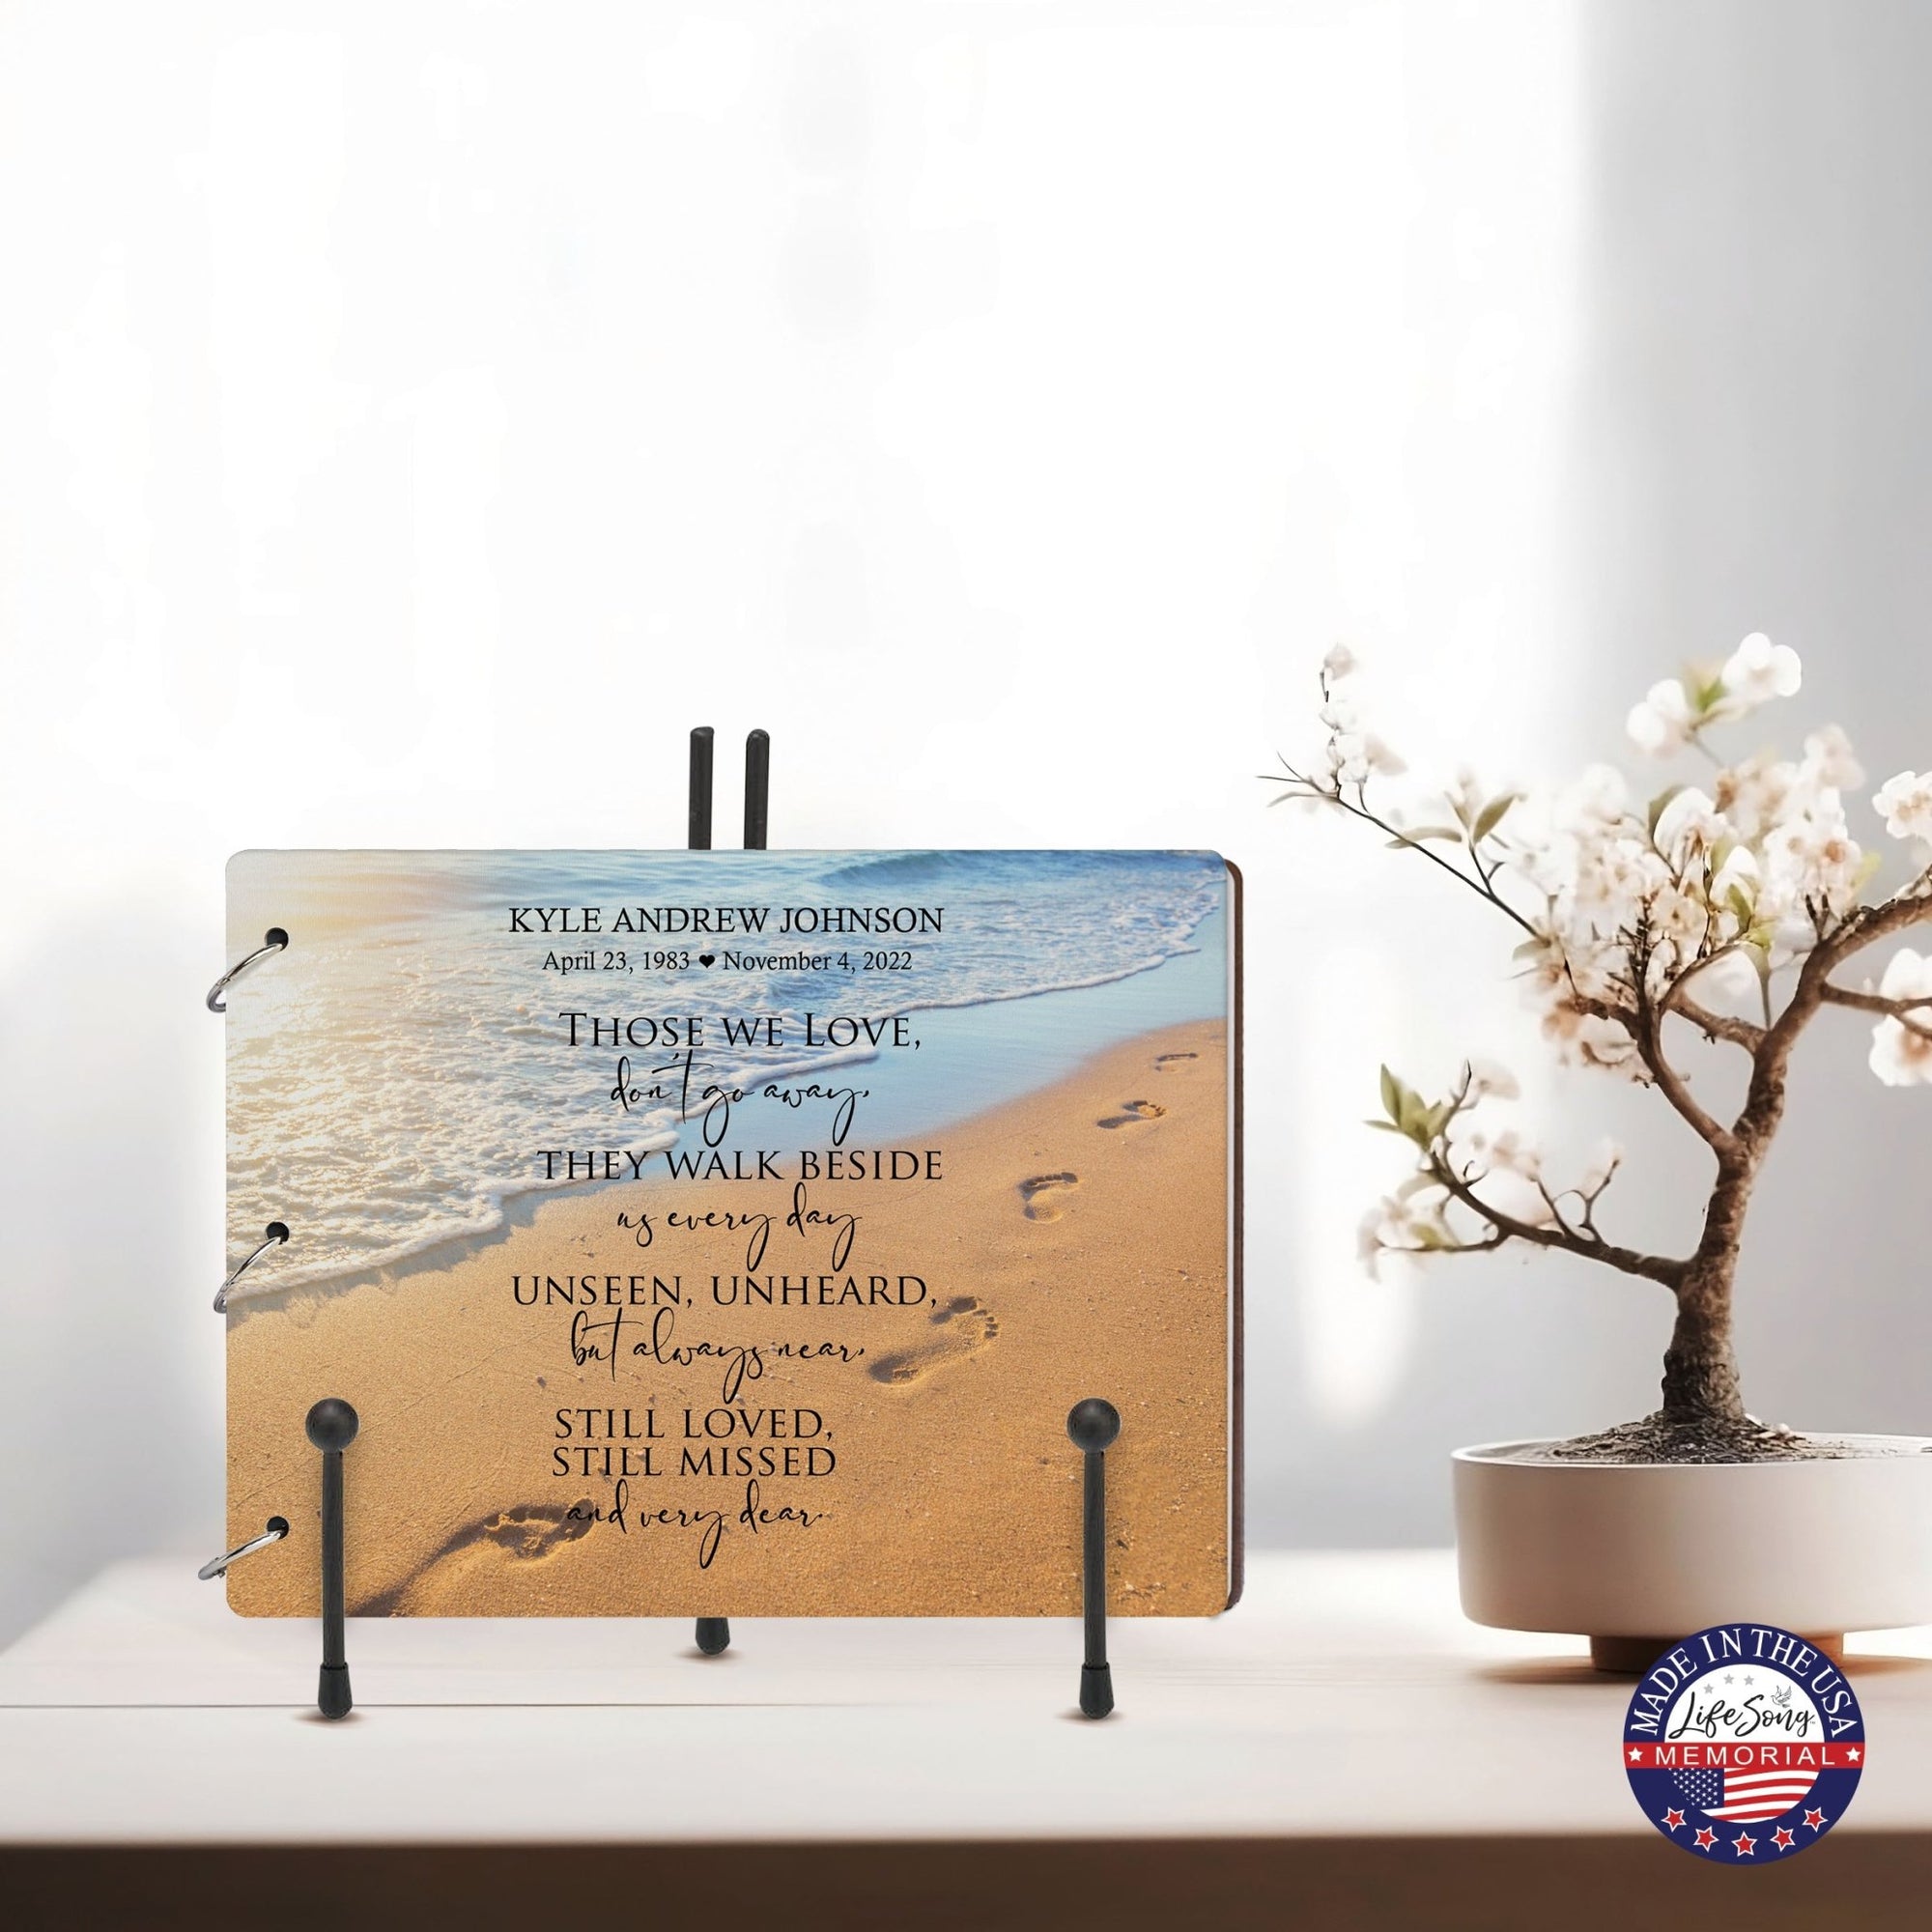 Personalized Celebration Of Life Funeral Guest Books For Memorial Services Registry With Wooden Cover - Those We Love - LifeSong Milestones